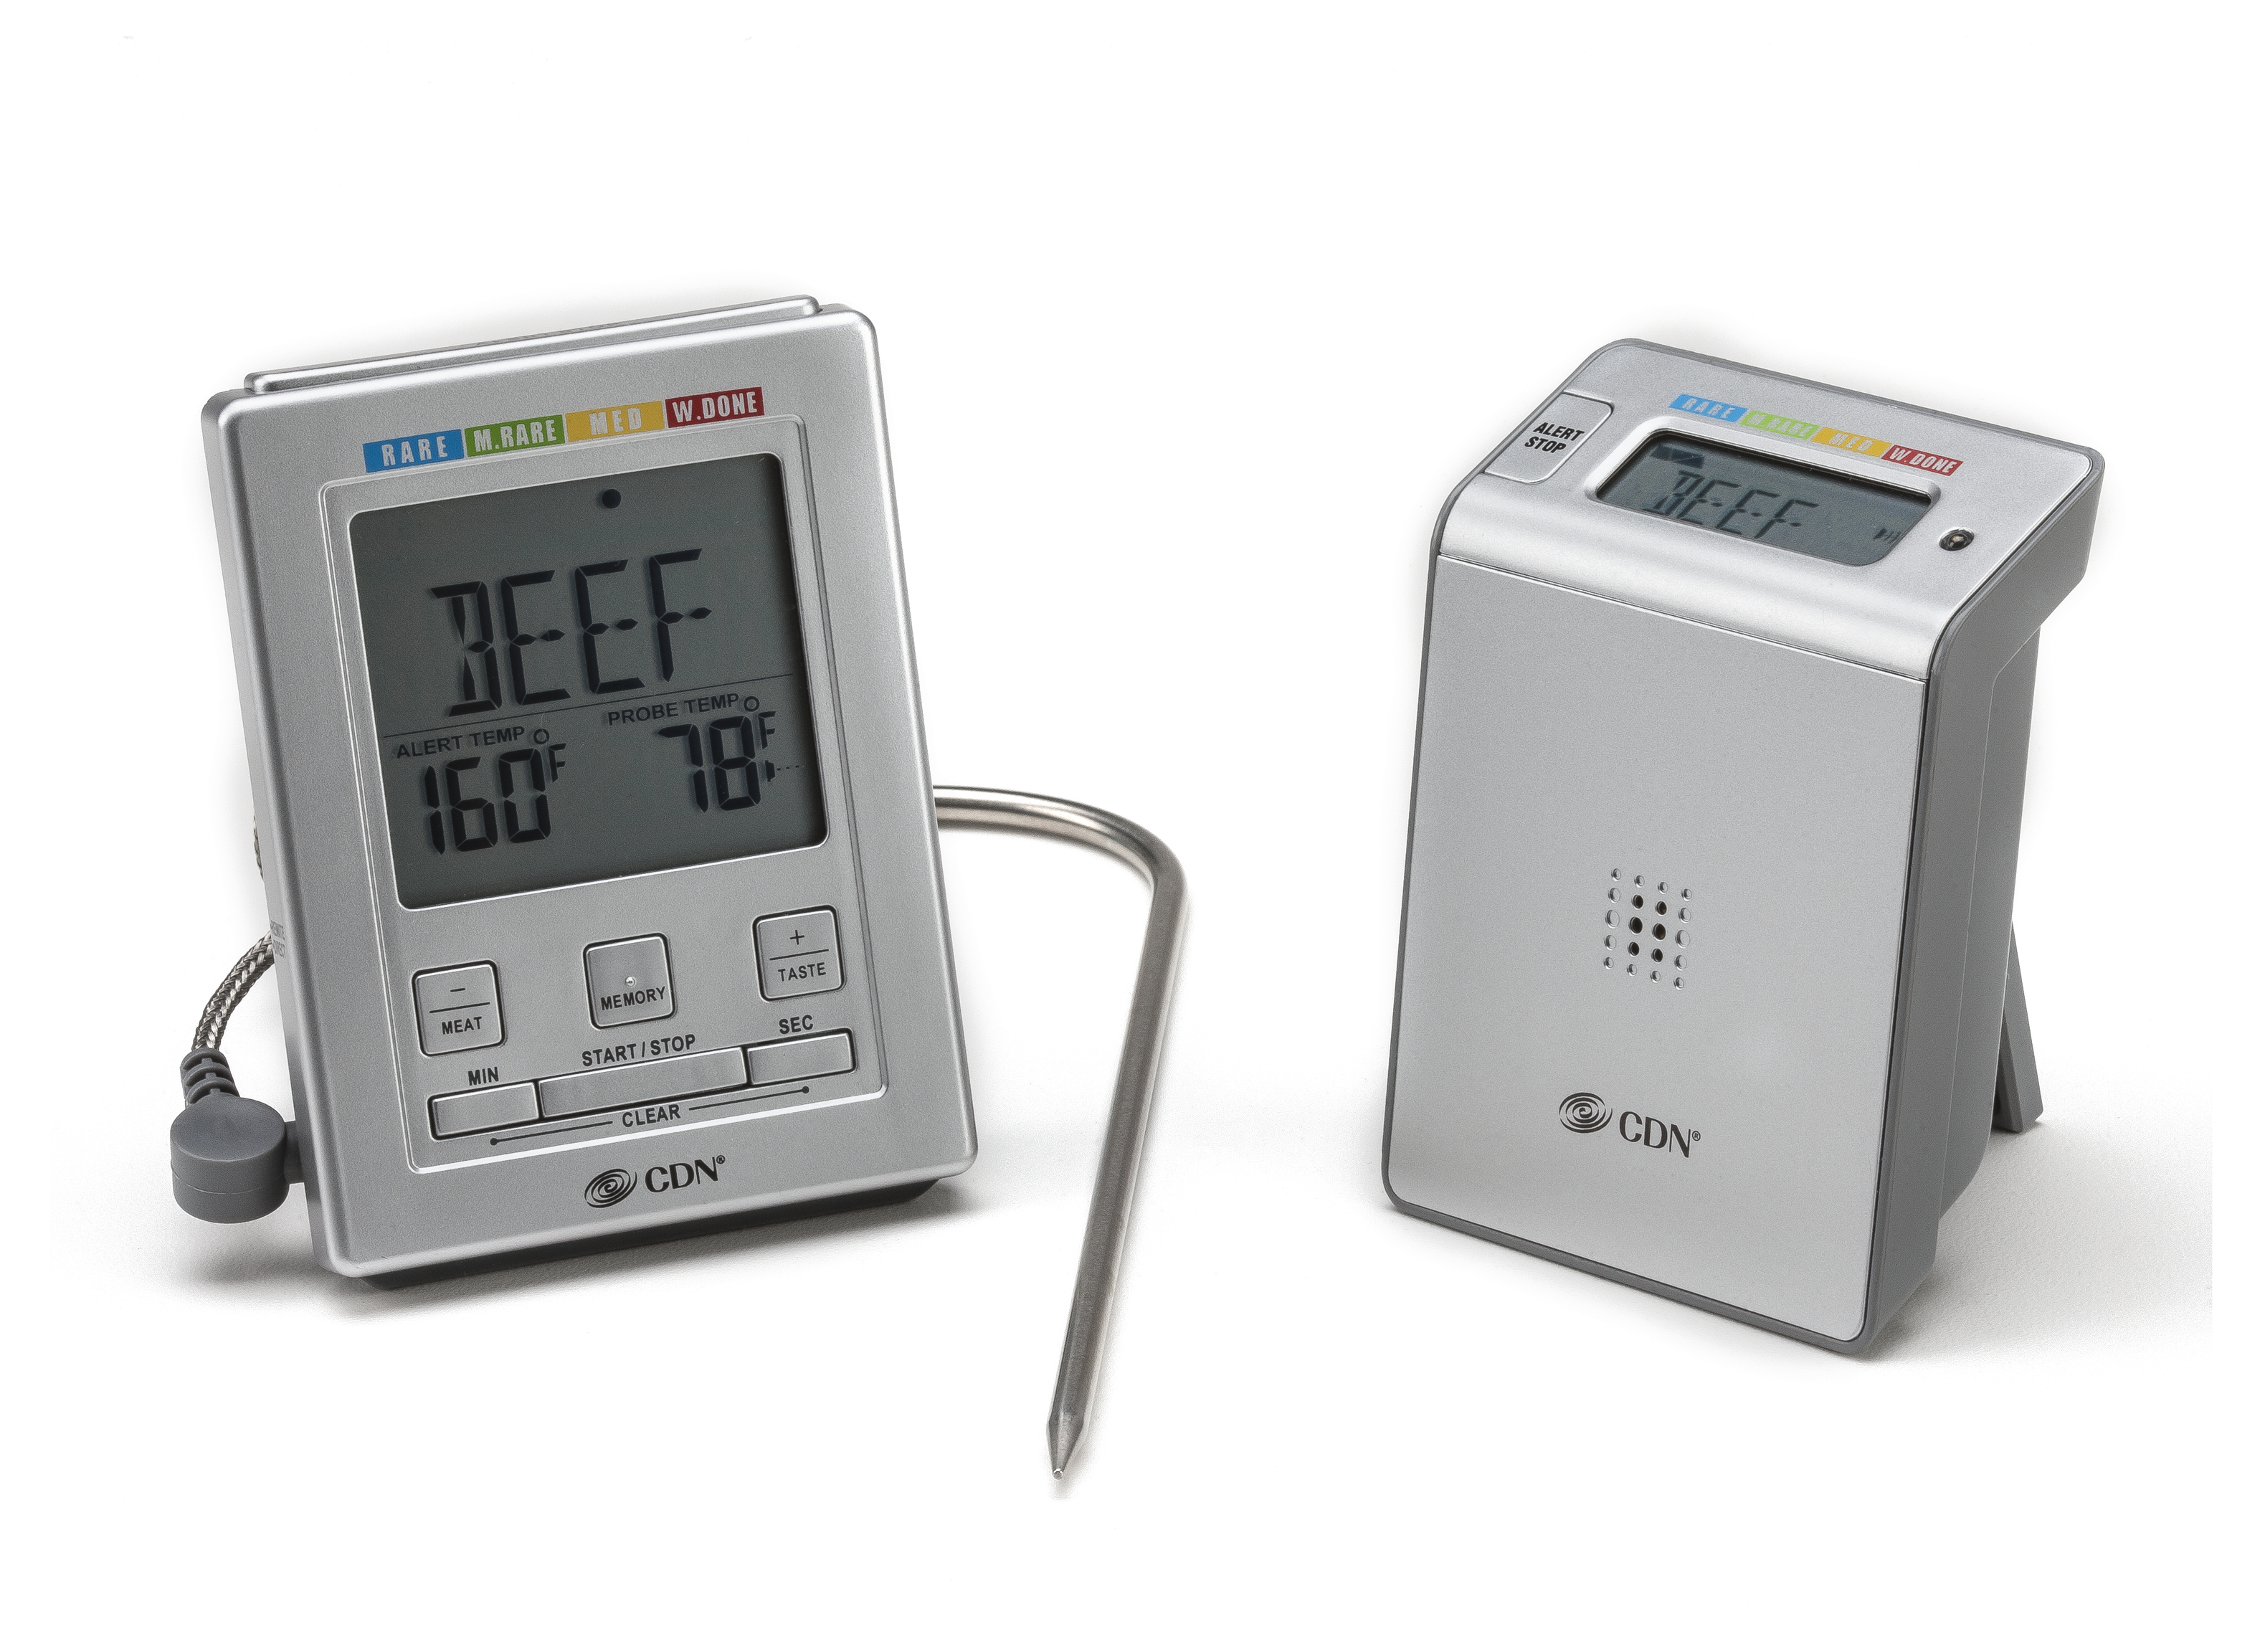 https://crdms.images.consumerreports.org/prod/products/cr/models/231045-meatthermometers-cdn-wirelessprobewt2.png